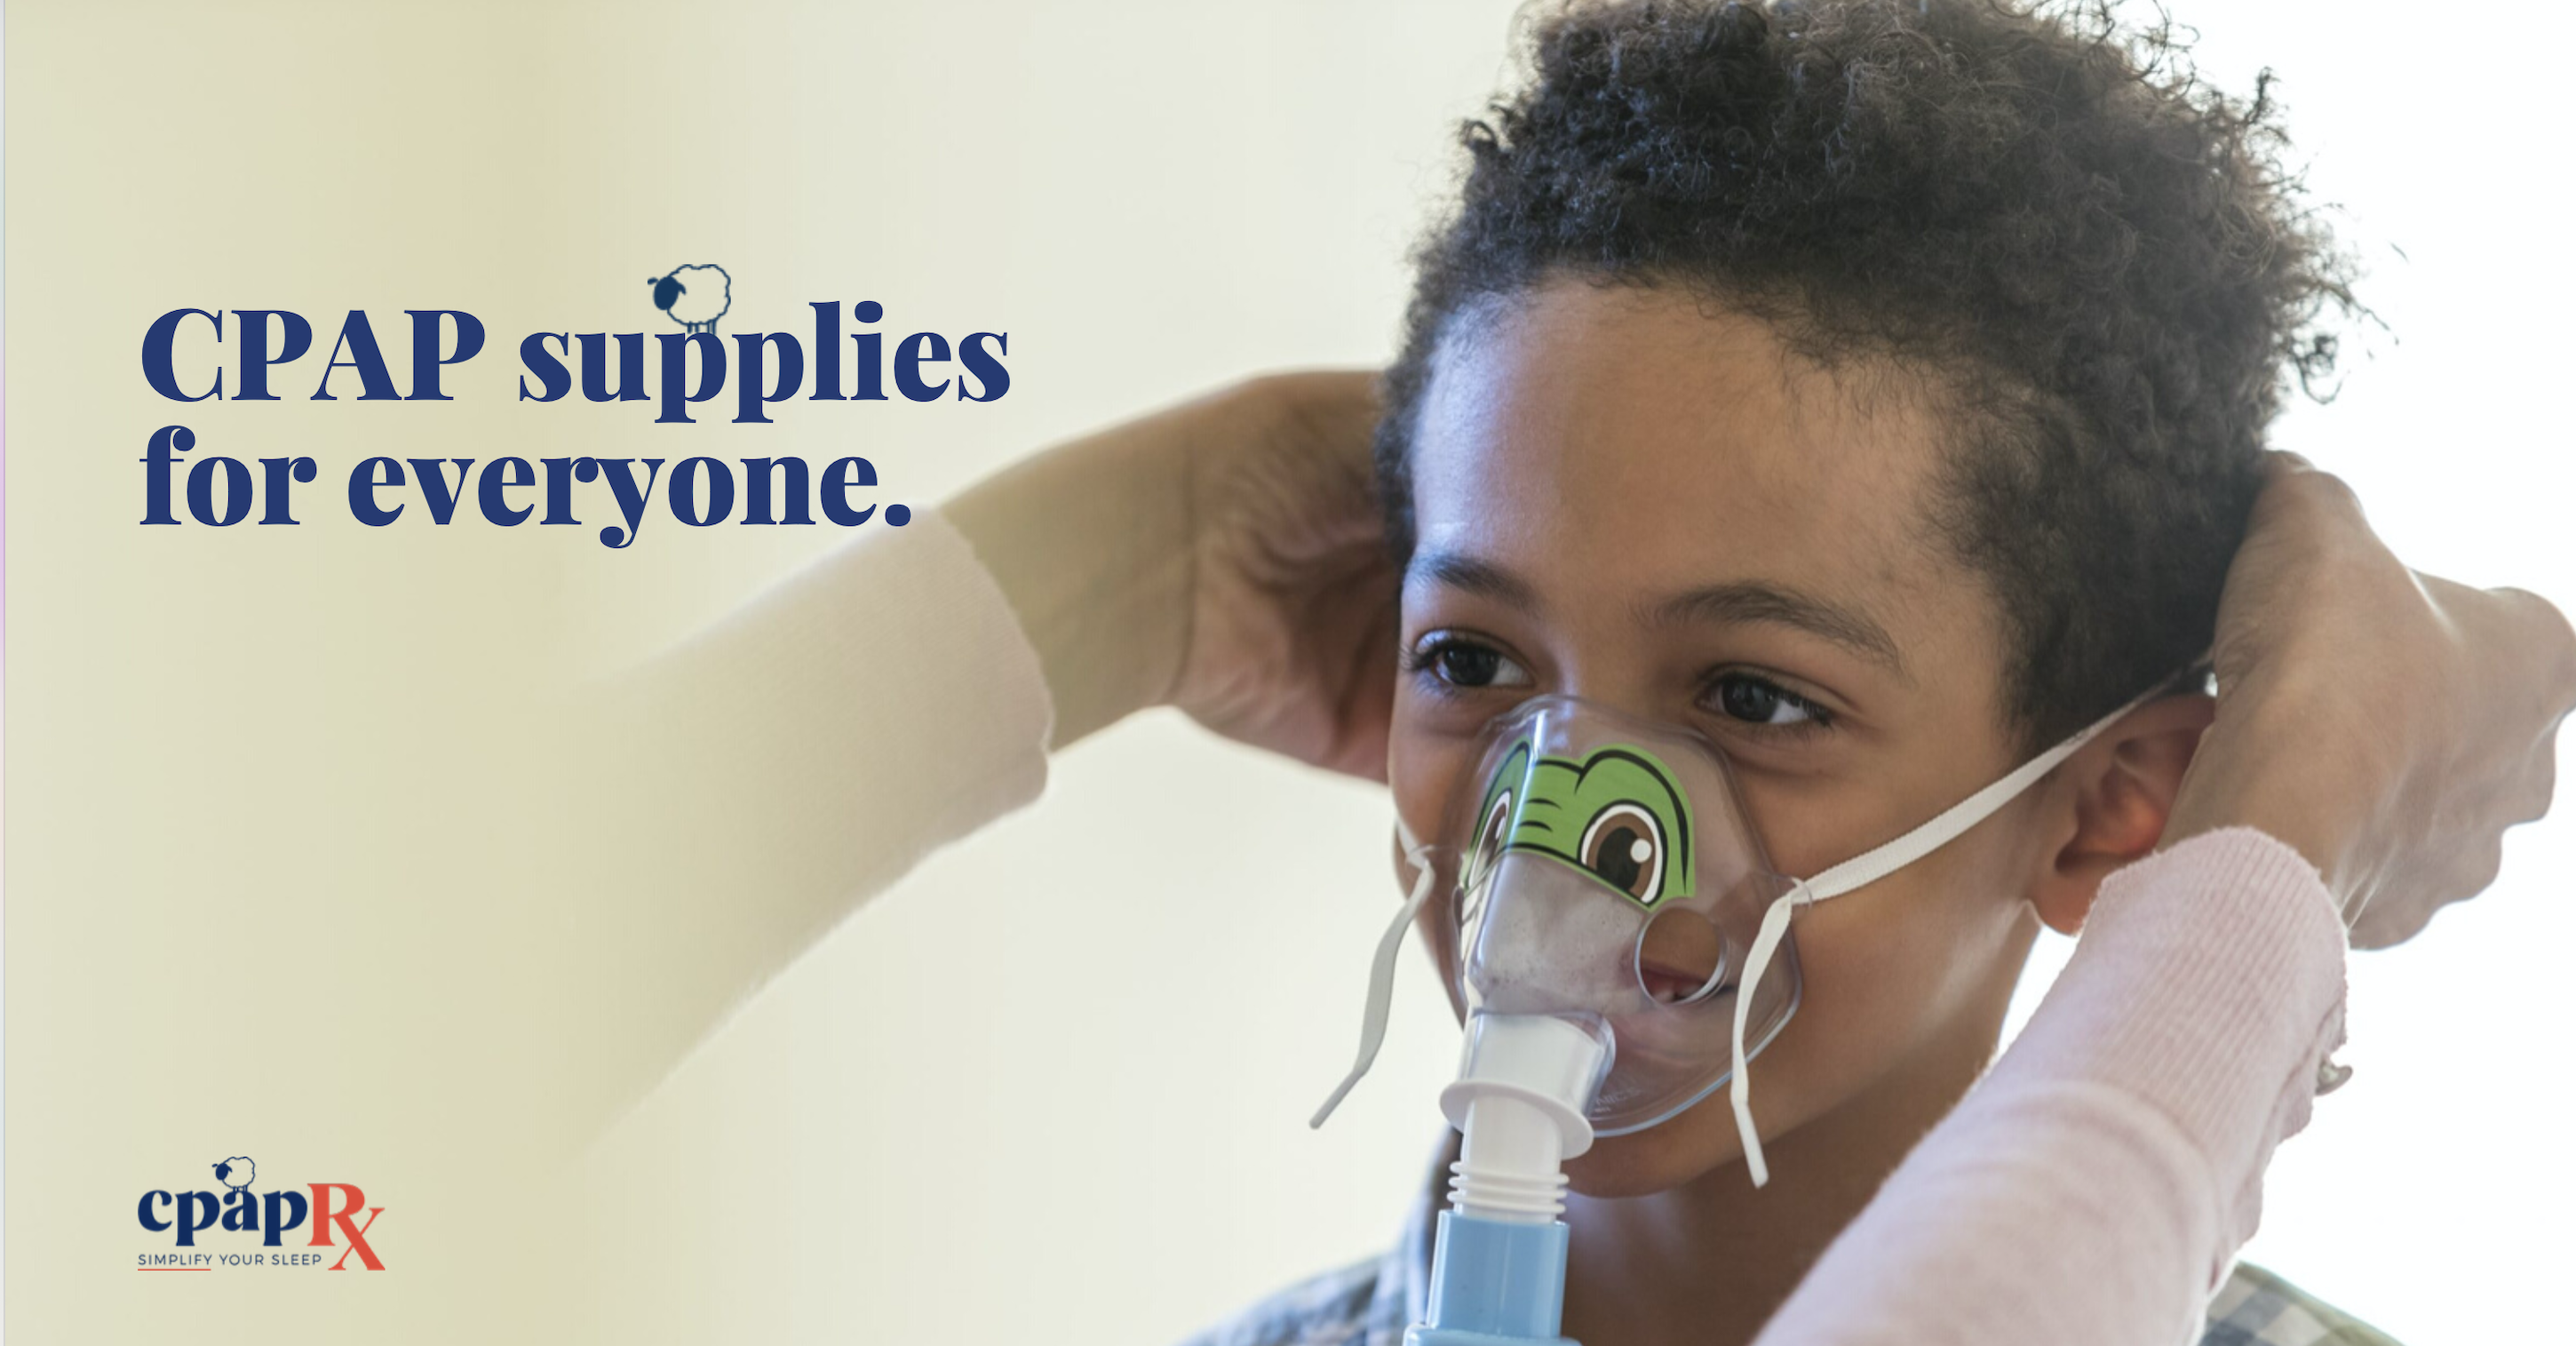 cpapRX offers CPAP supplies for everyone